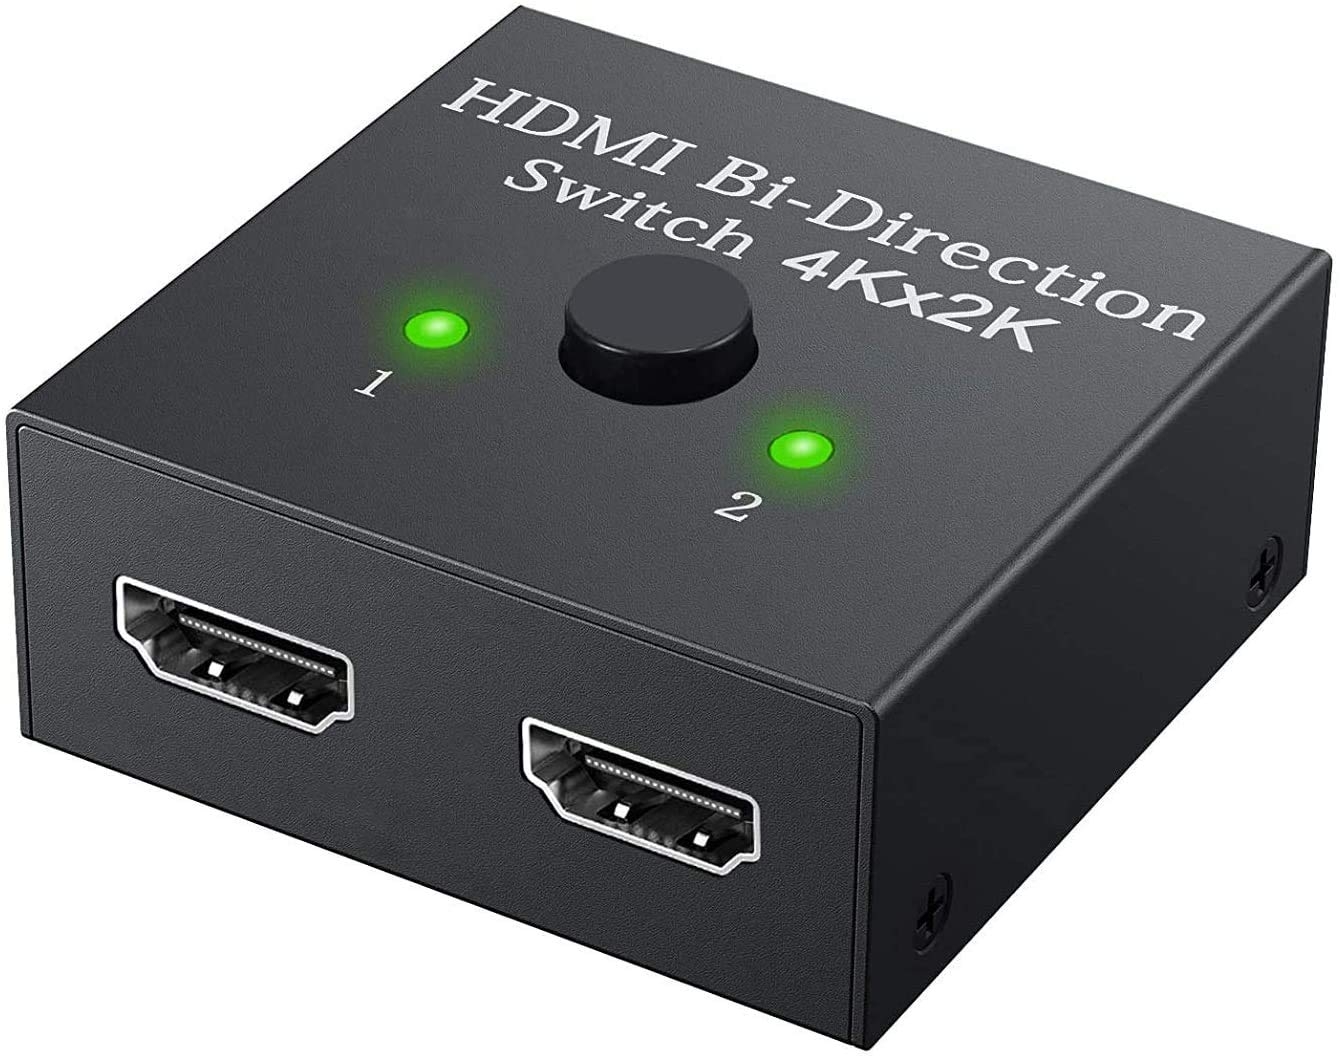 2 In 1 Out or 1 In 2 Out HDMI Switch Splitter 2 Port Bi-Directional Manual HDMI Switch 4K, 3D Supports - 1Yr Warranty